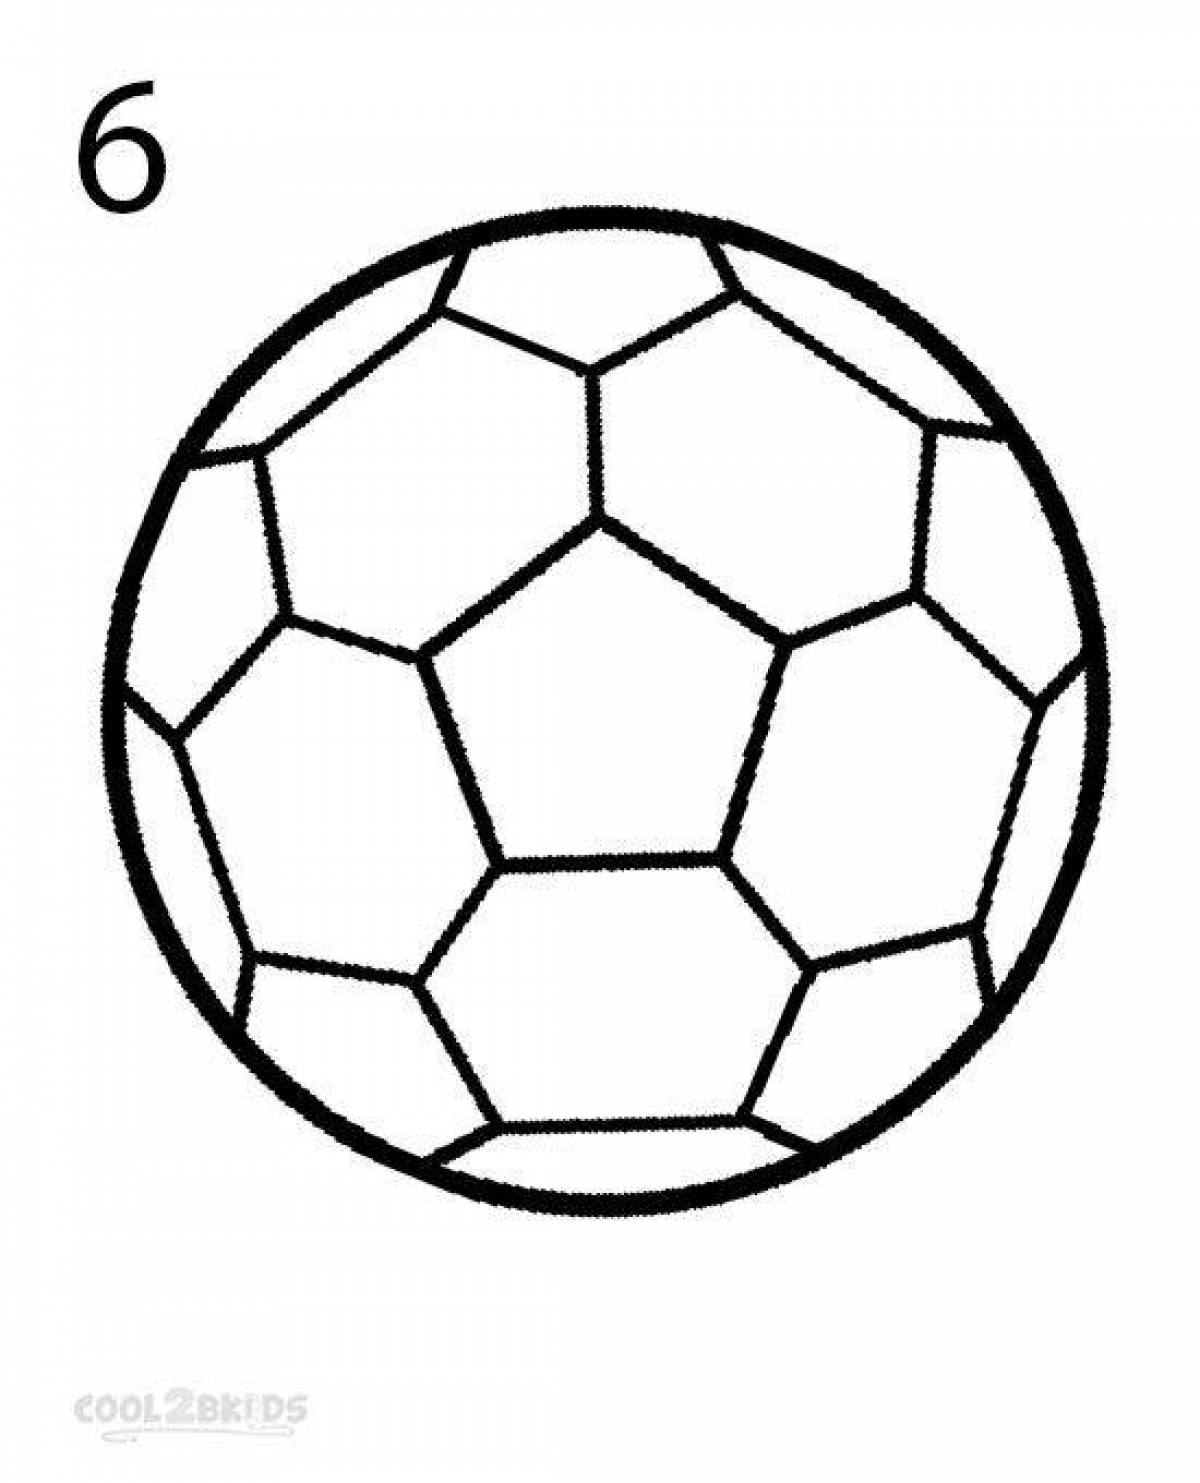 Coloring amazing soccer ball